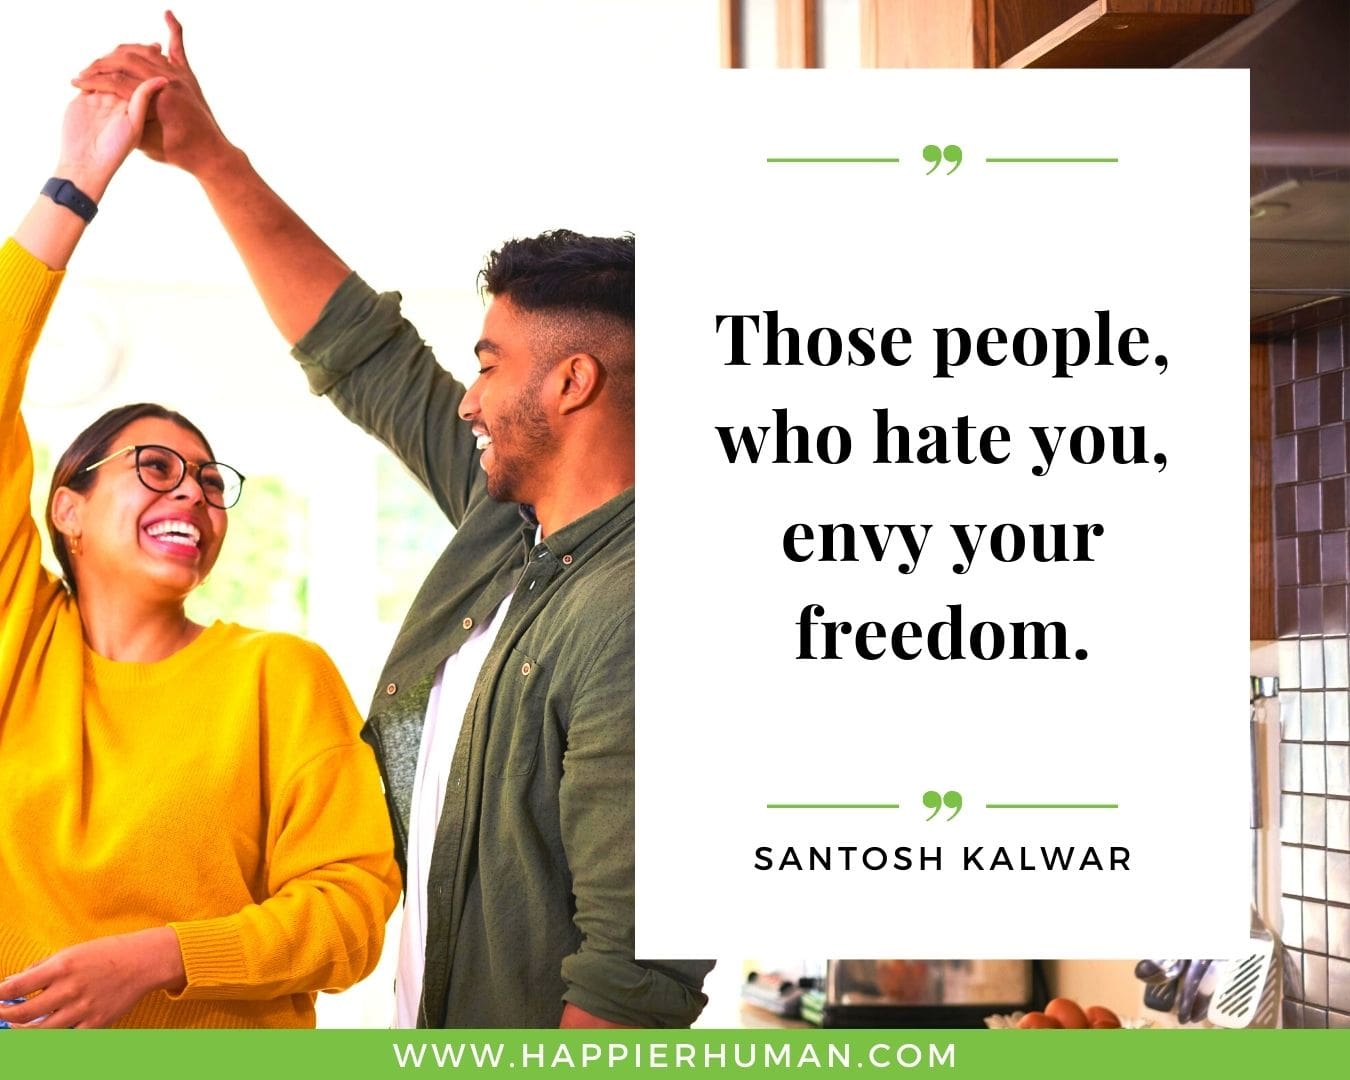 Haters Quotes - “Those people, who hate you, envy your freedom.“ - Santosh Kalwar